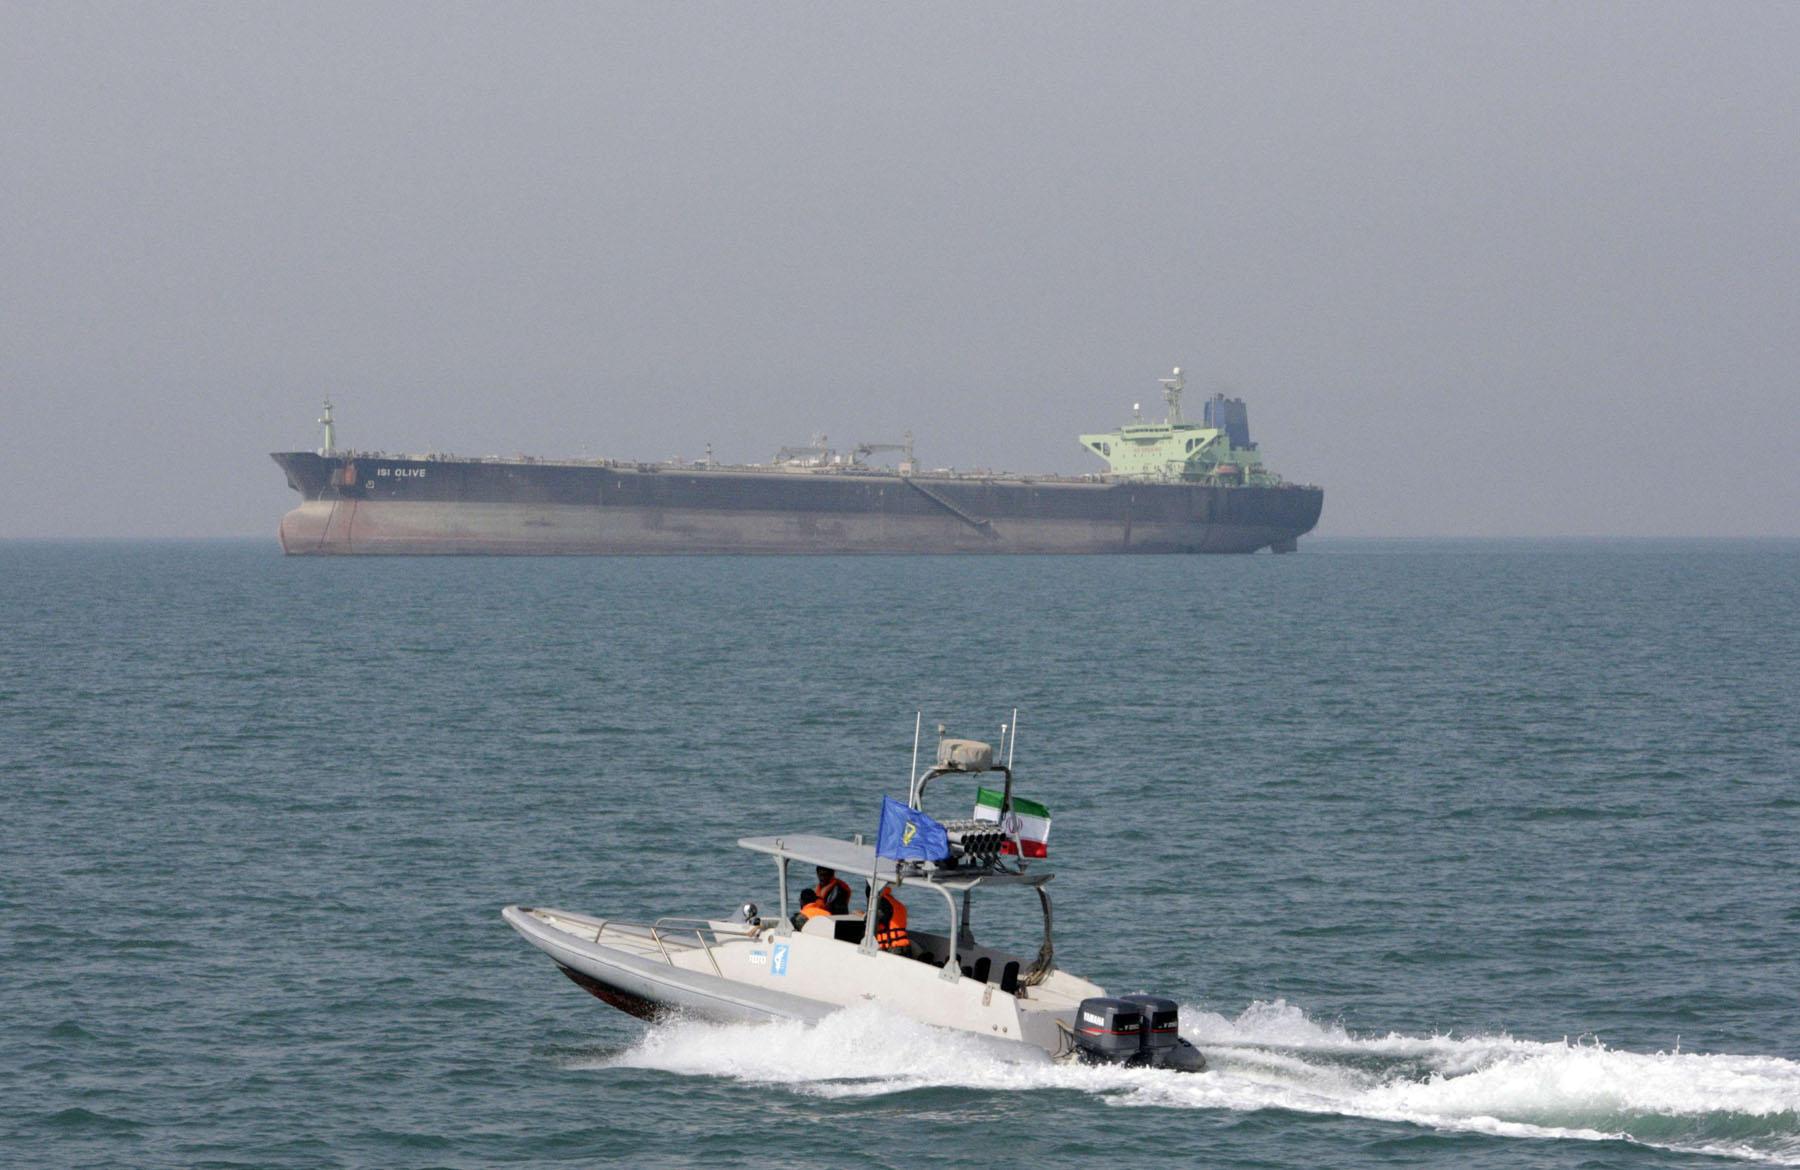 The Guards' statement came after officials said Iran had come to the aid of an ailing tanker on Sunday